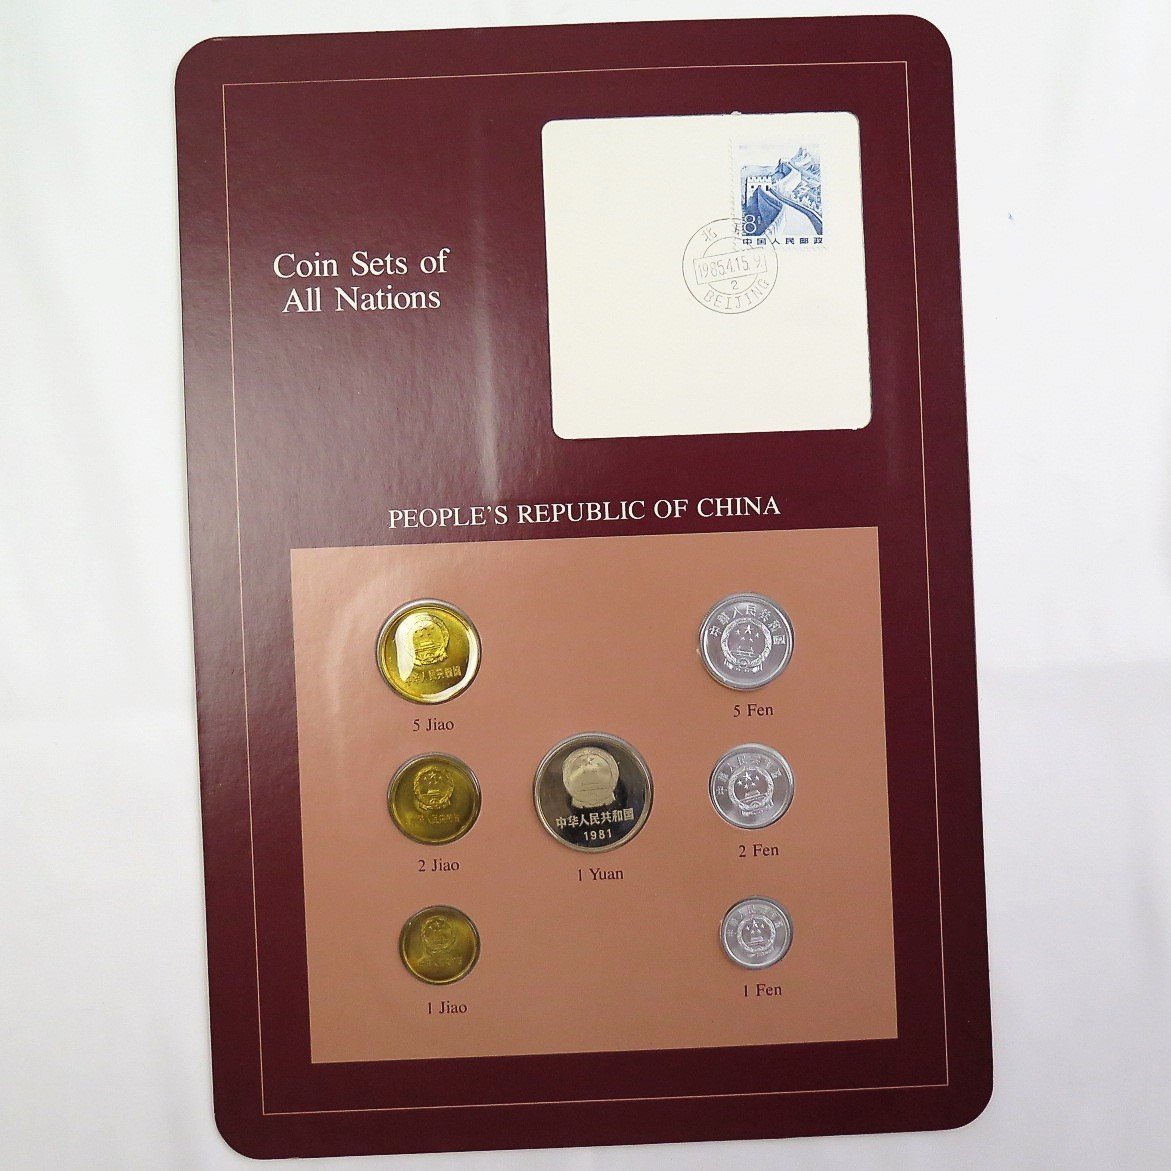 WEB限定 Coin Sets of All Nations より 解説書つき外国のコインセット